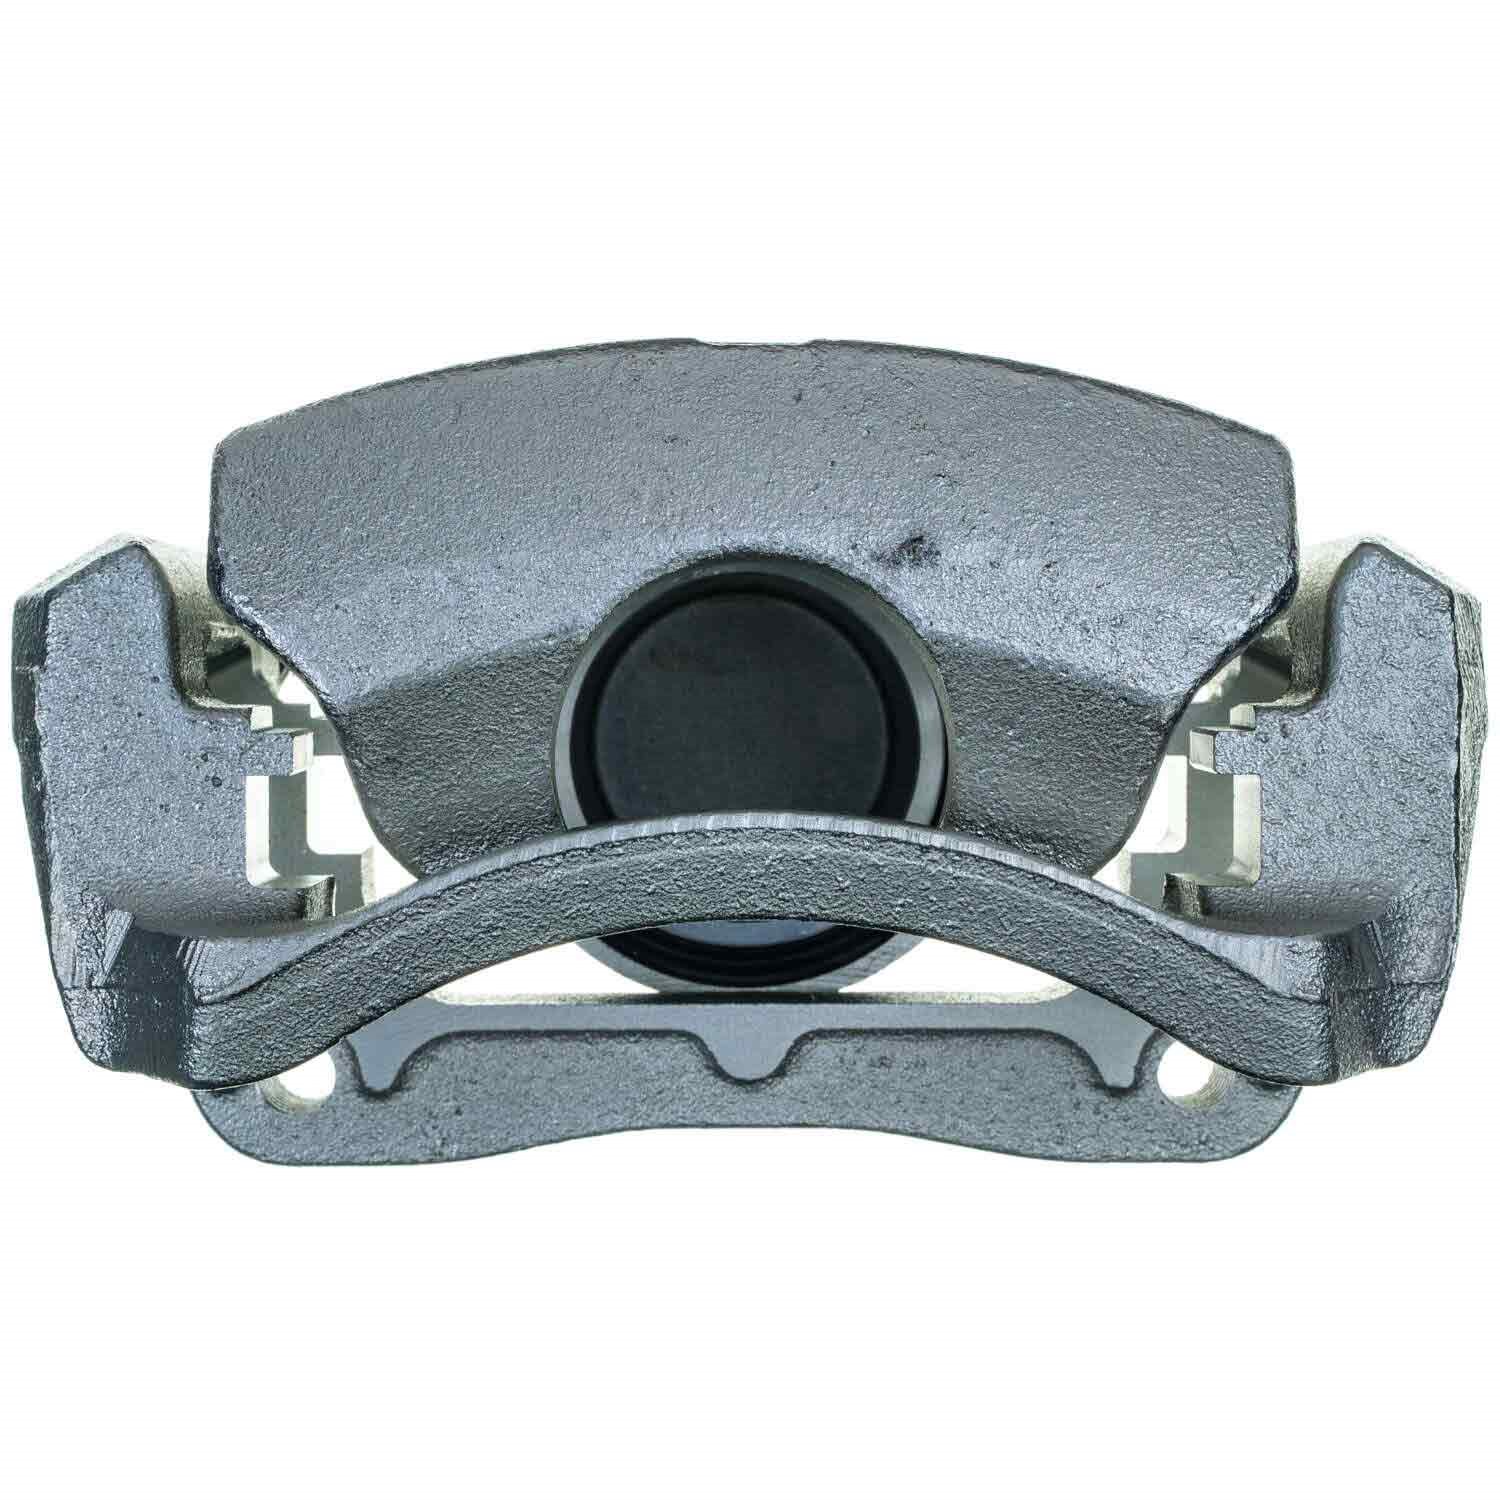 OE REPLACEMENT CALIPER Front 11-06 Chevrolet HHR/05-04 Chevrolet Malibu/08-06 Chevrolet Malibu/07-06 Pontiac G6/